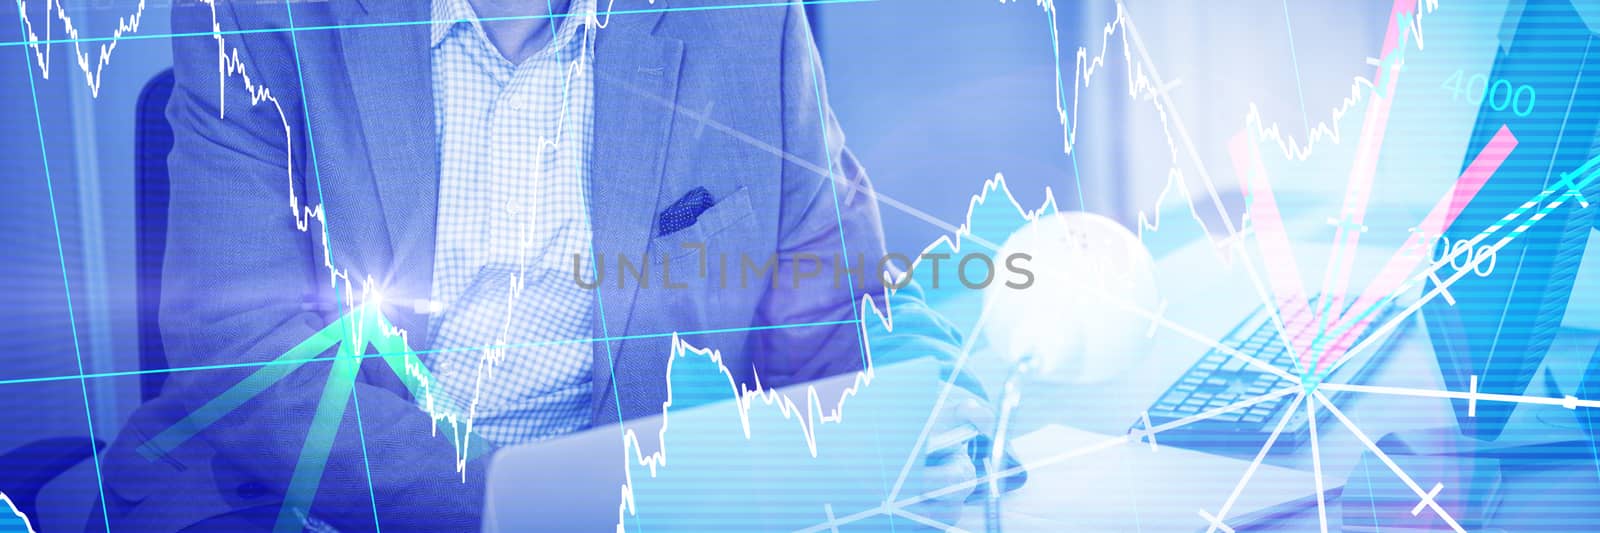 Composite image of stocks and shares by Wavebreakmedia